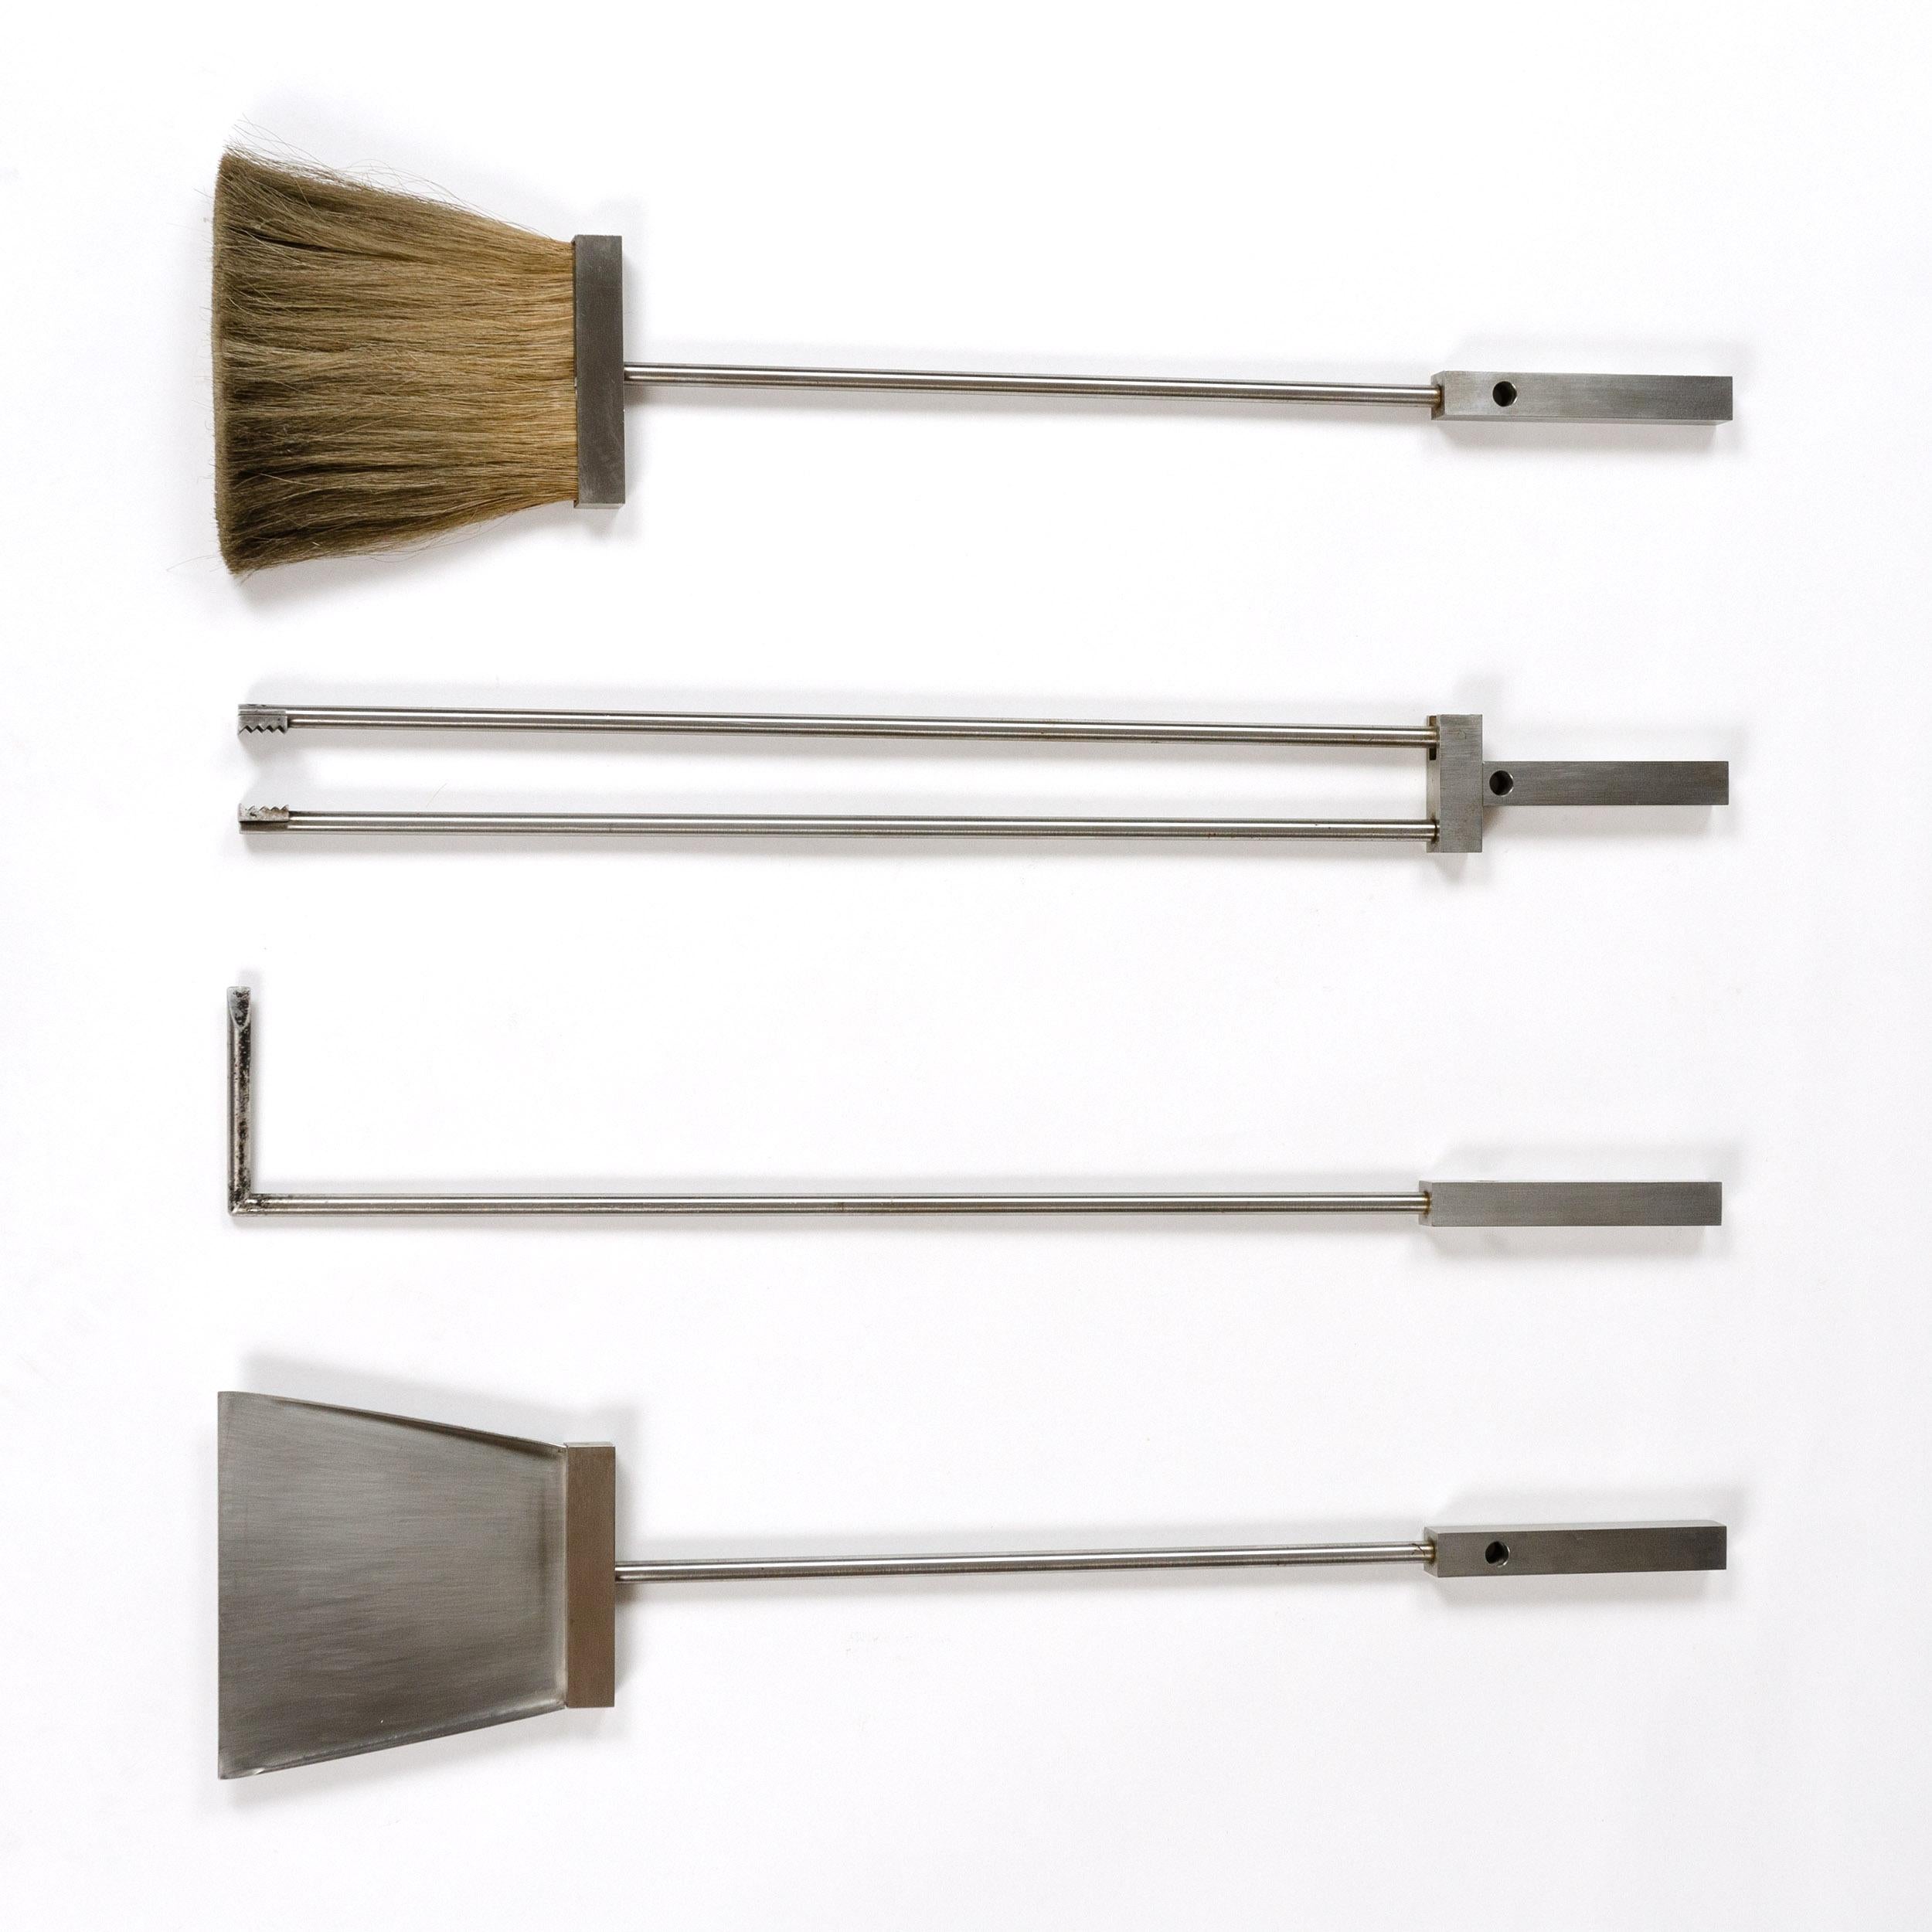 A set of four (4) machined brushed steel fire tools with squared handles. Mid-Century Modern styling.